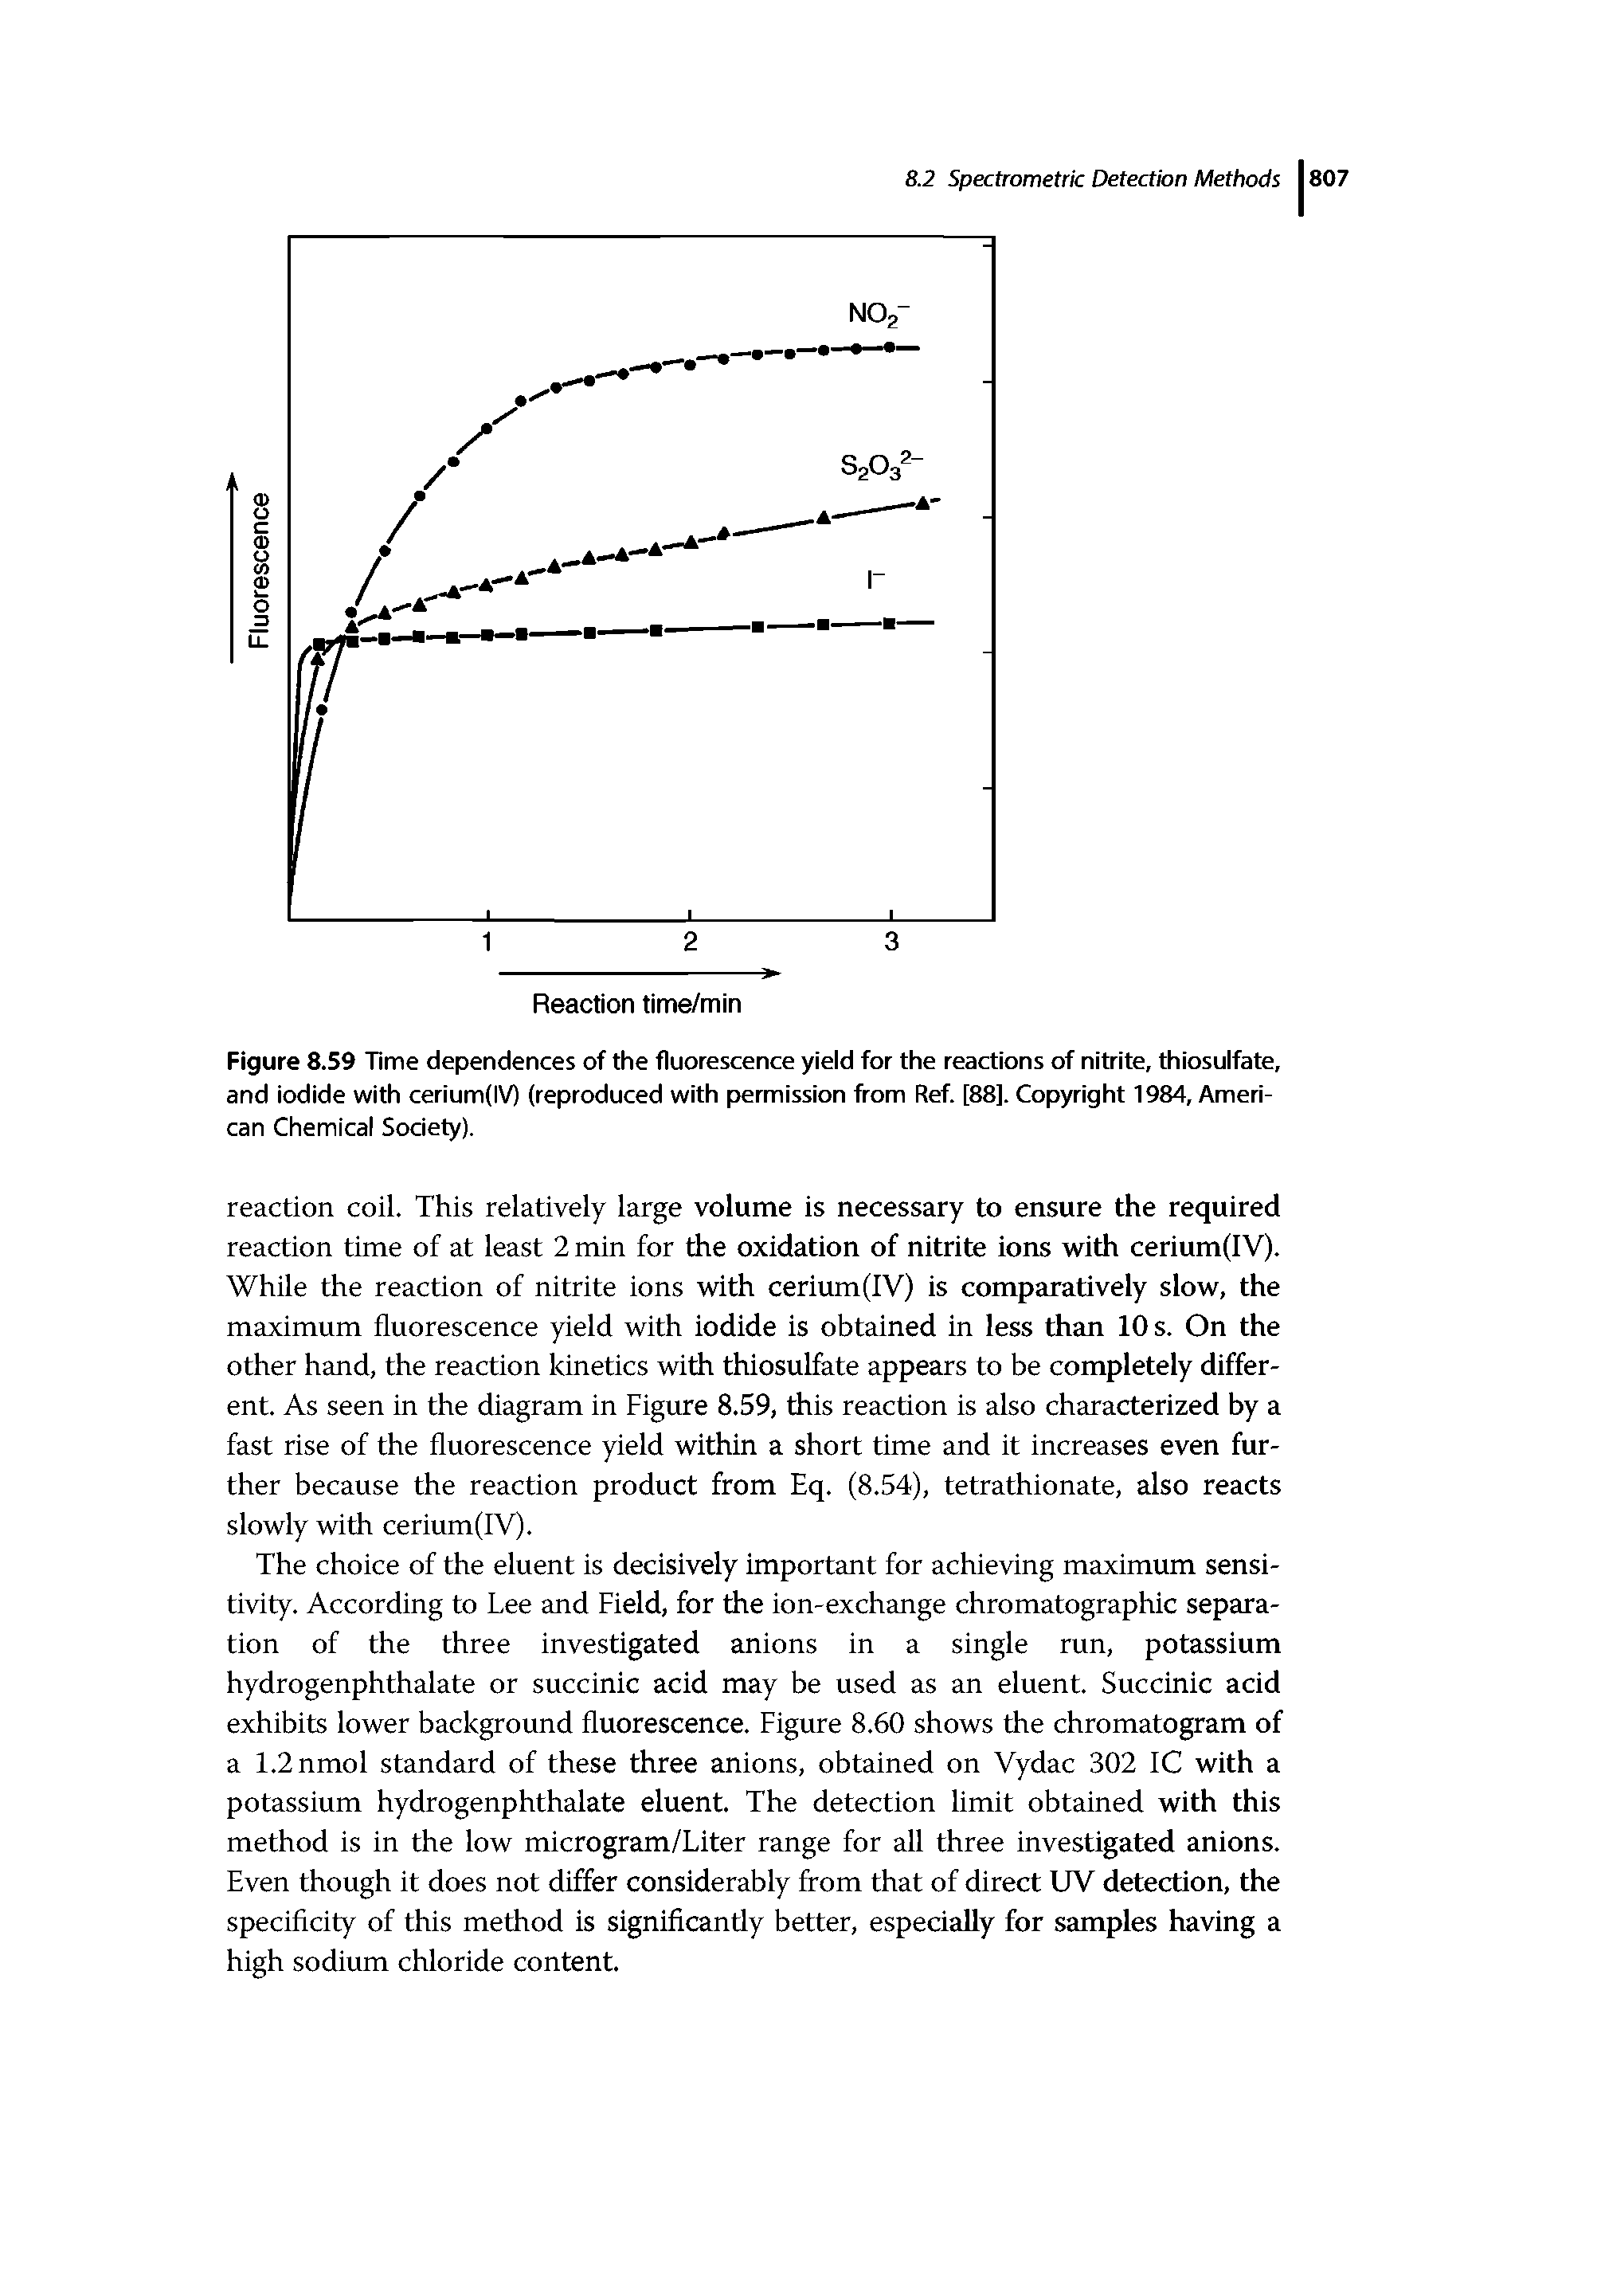 Figure 8.59 Time dependences of the fluorescence yield for the reactions of nitrite, thiosuifate, and iodide with cerium(IV) (reproduced with permission from Ref. [88]. Copyright 1984, American Chemical Society).